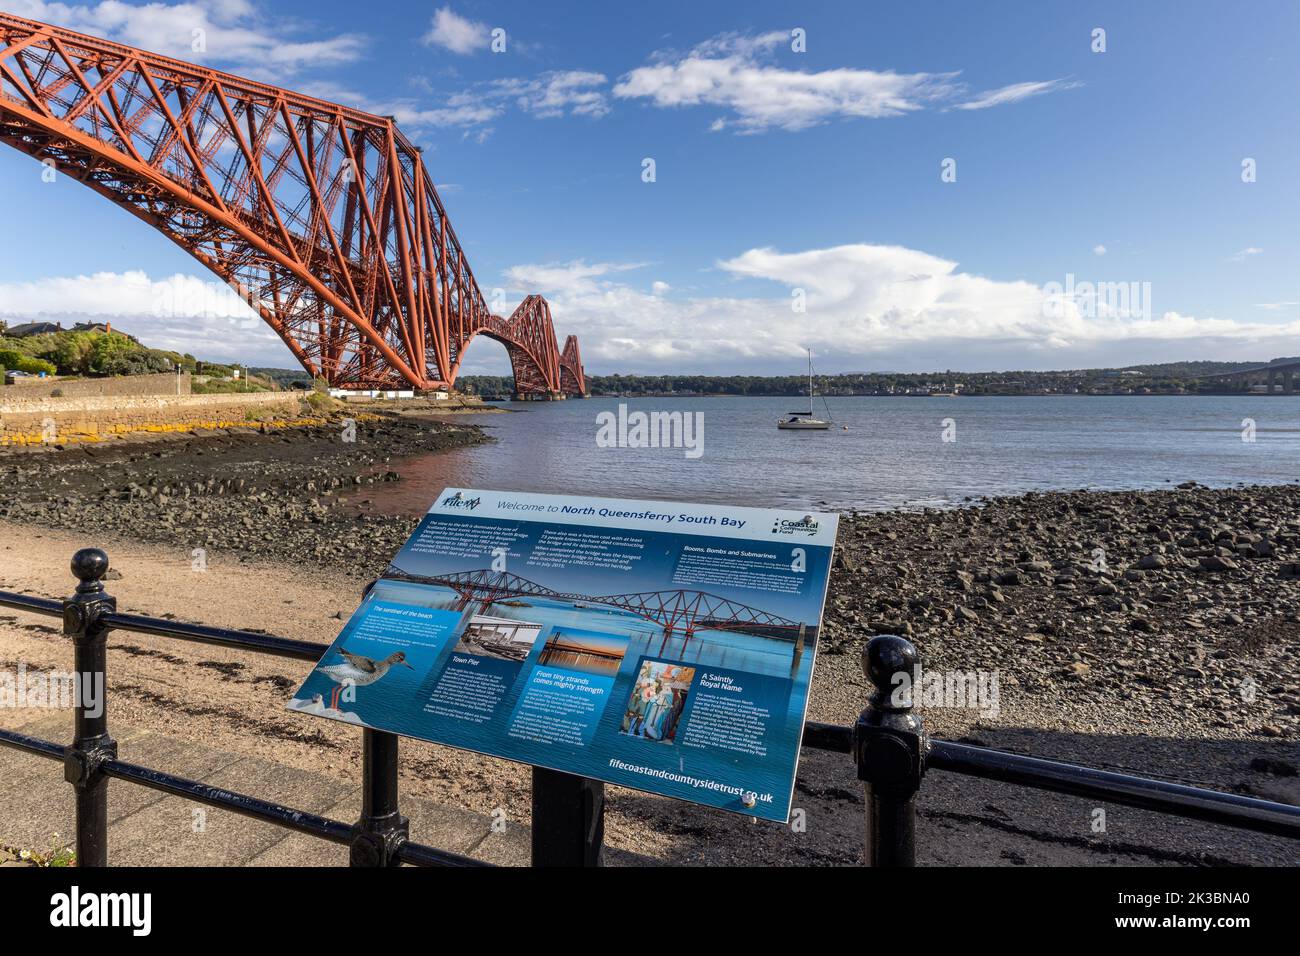 The magnificent Forth Rail Bridge taken from North Queensferry South Bay, Scotland. Stock Photo